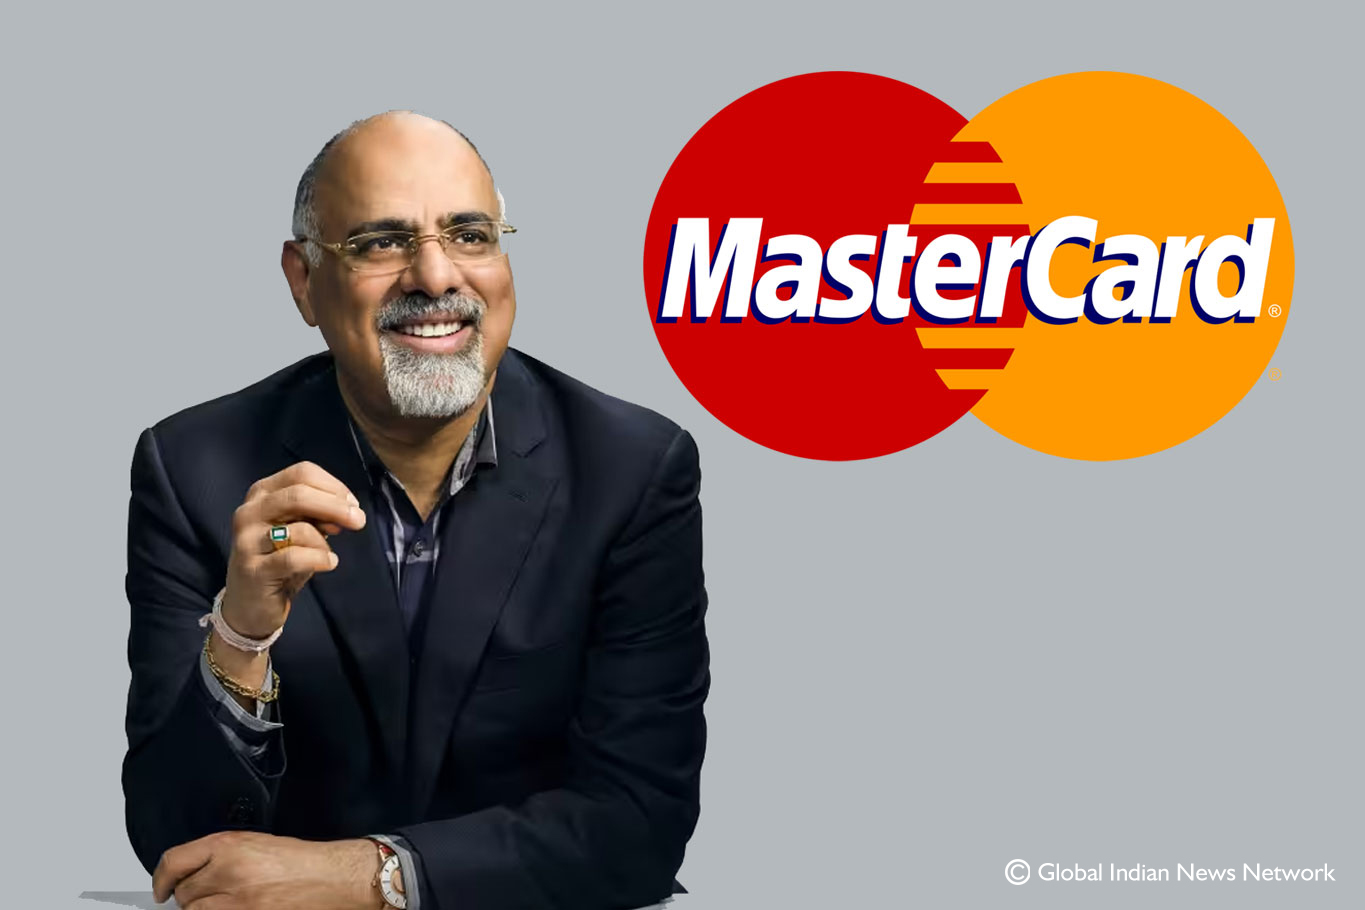 Mastercard's Raja Rajamannar recognized as one of the top 25 CMOs